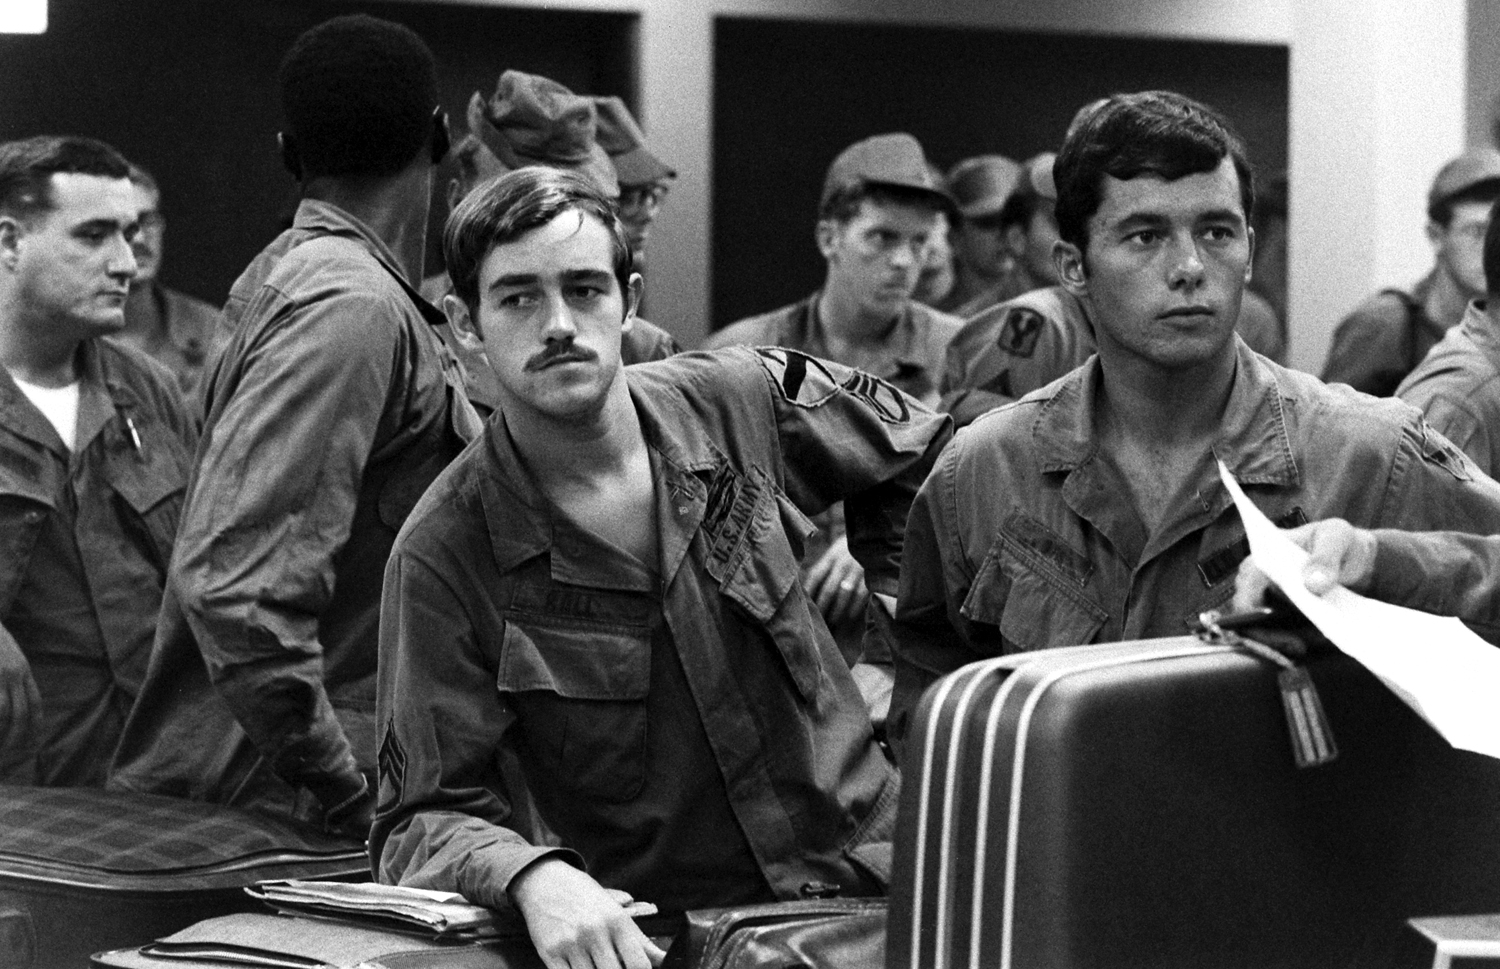 Sgt. Mike Ball, returning home from Vietnam, 1970.